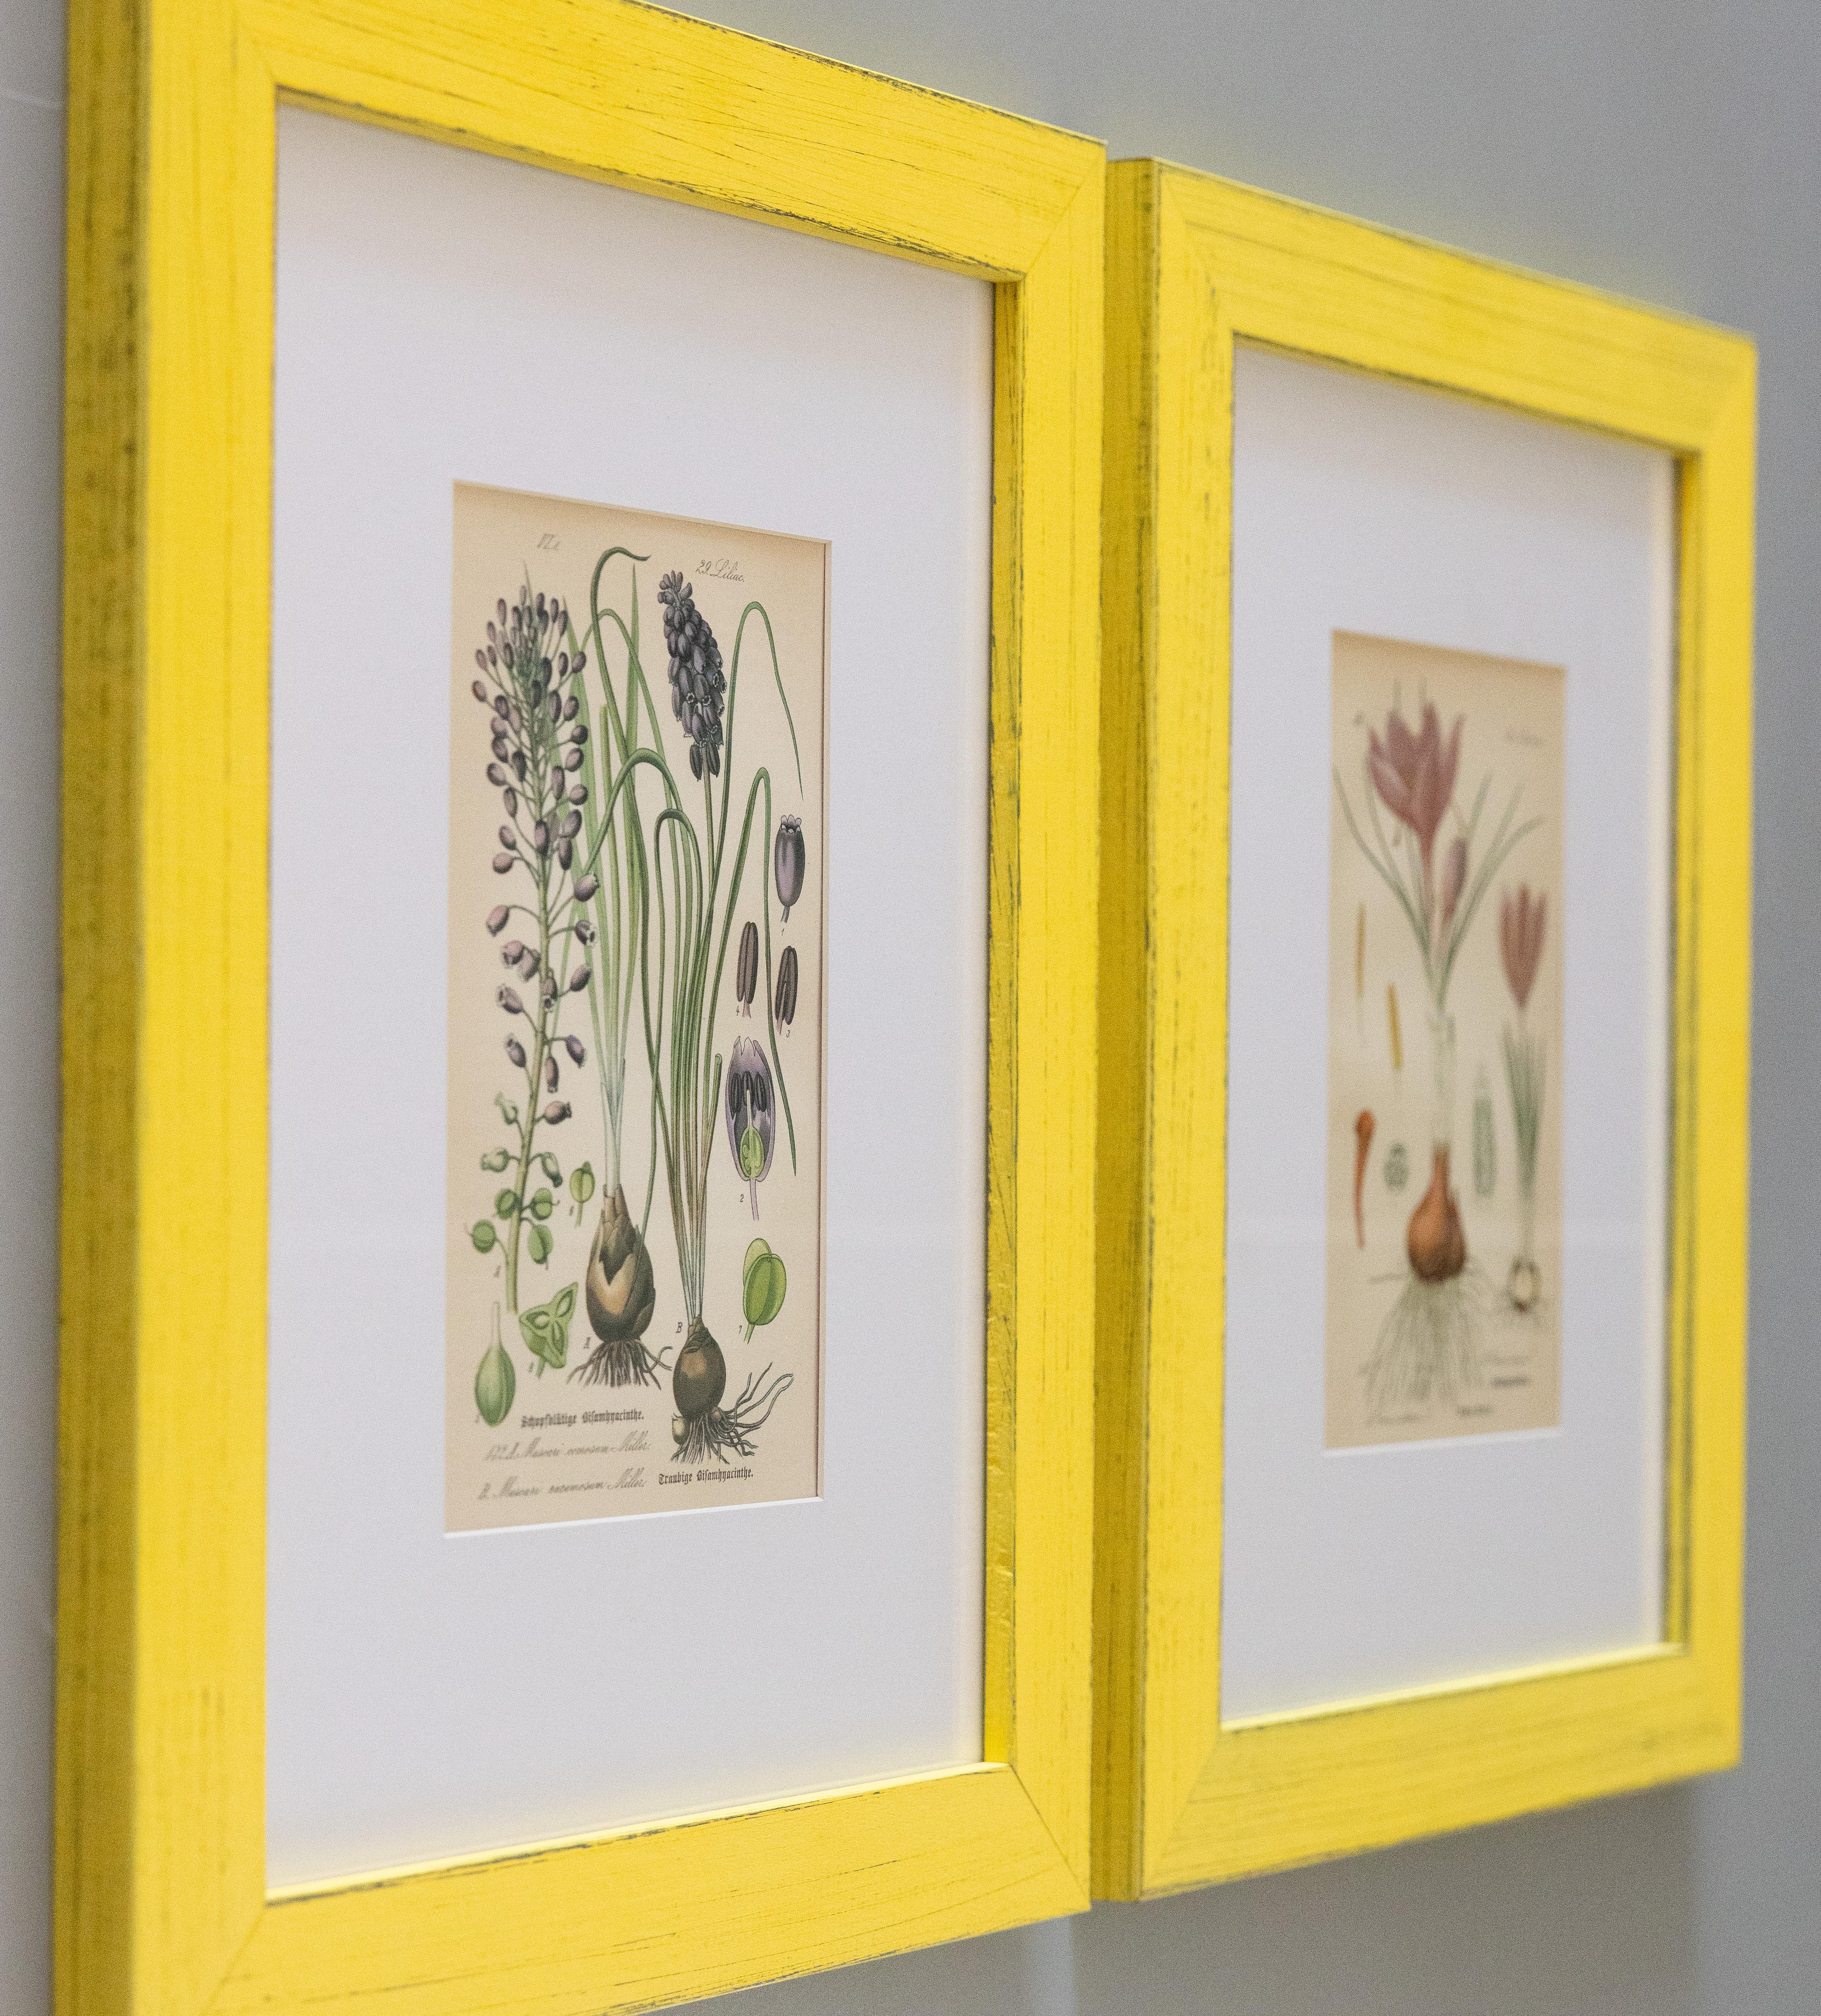 Vibrant custom framed 19th century floral botanical engravings from Prof. Dr. Otto Wilhelm Thome's 